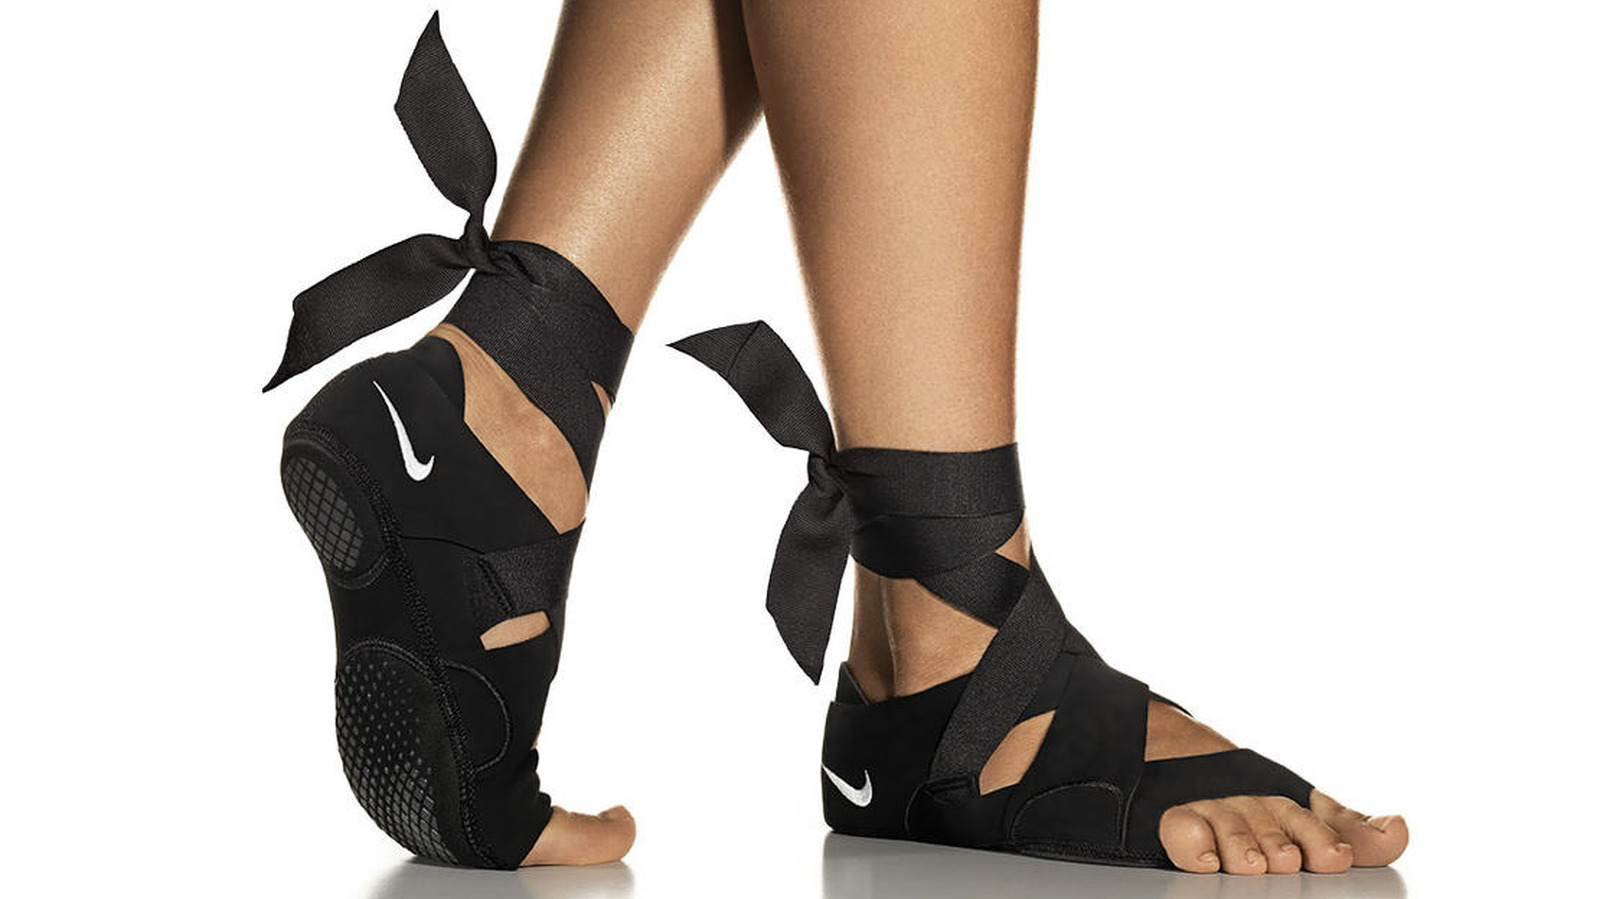 Are Nike Yoga Wrap Shoes Worth It?